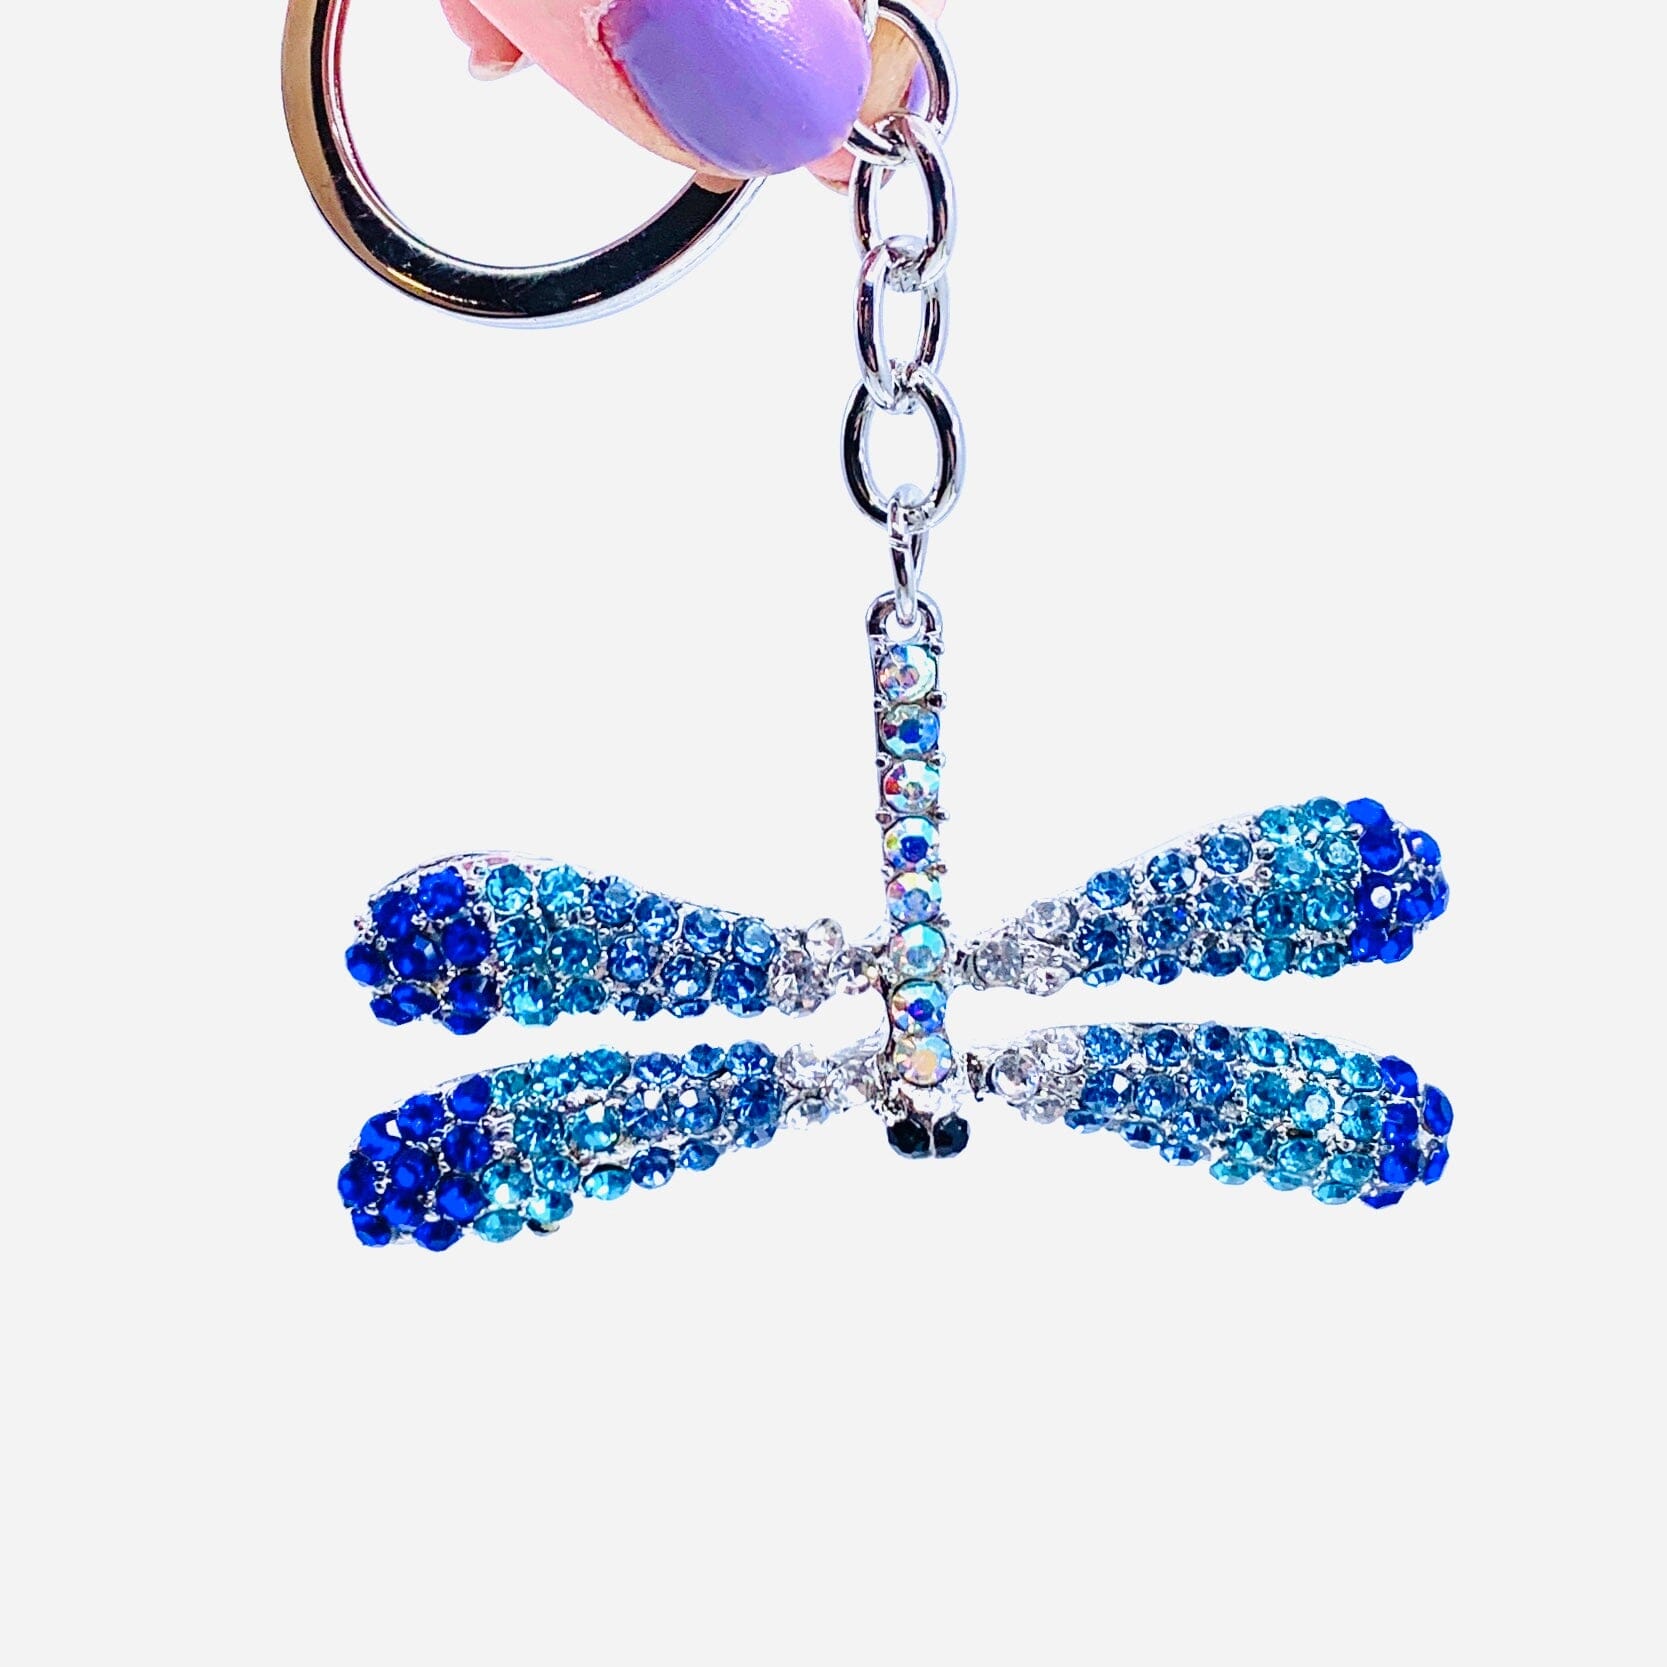 Bejeweled Key Chain 4, Dragonfly Accessory Kubla Craft 